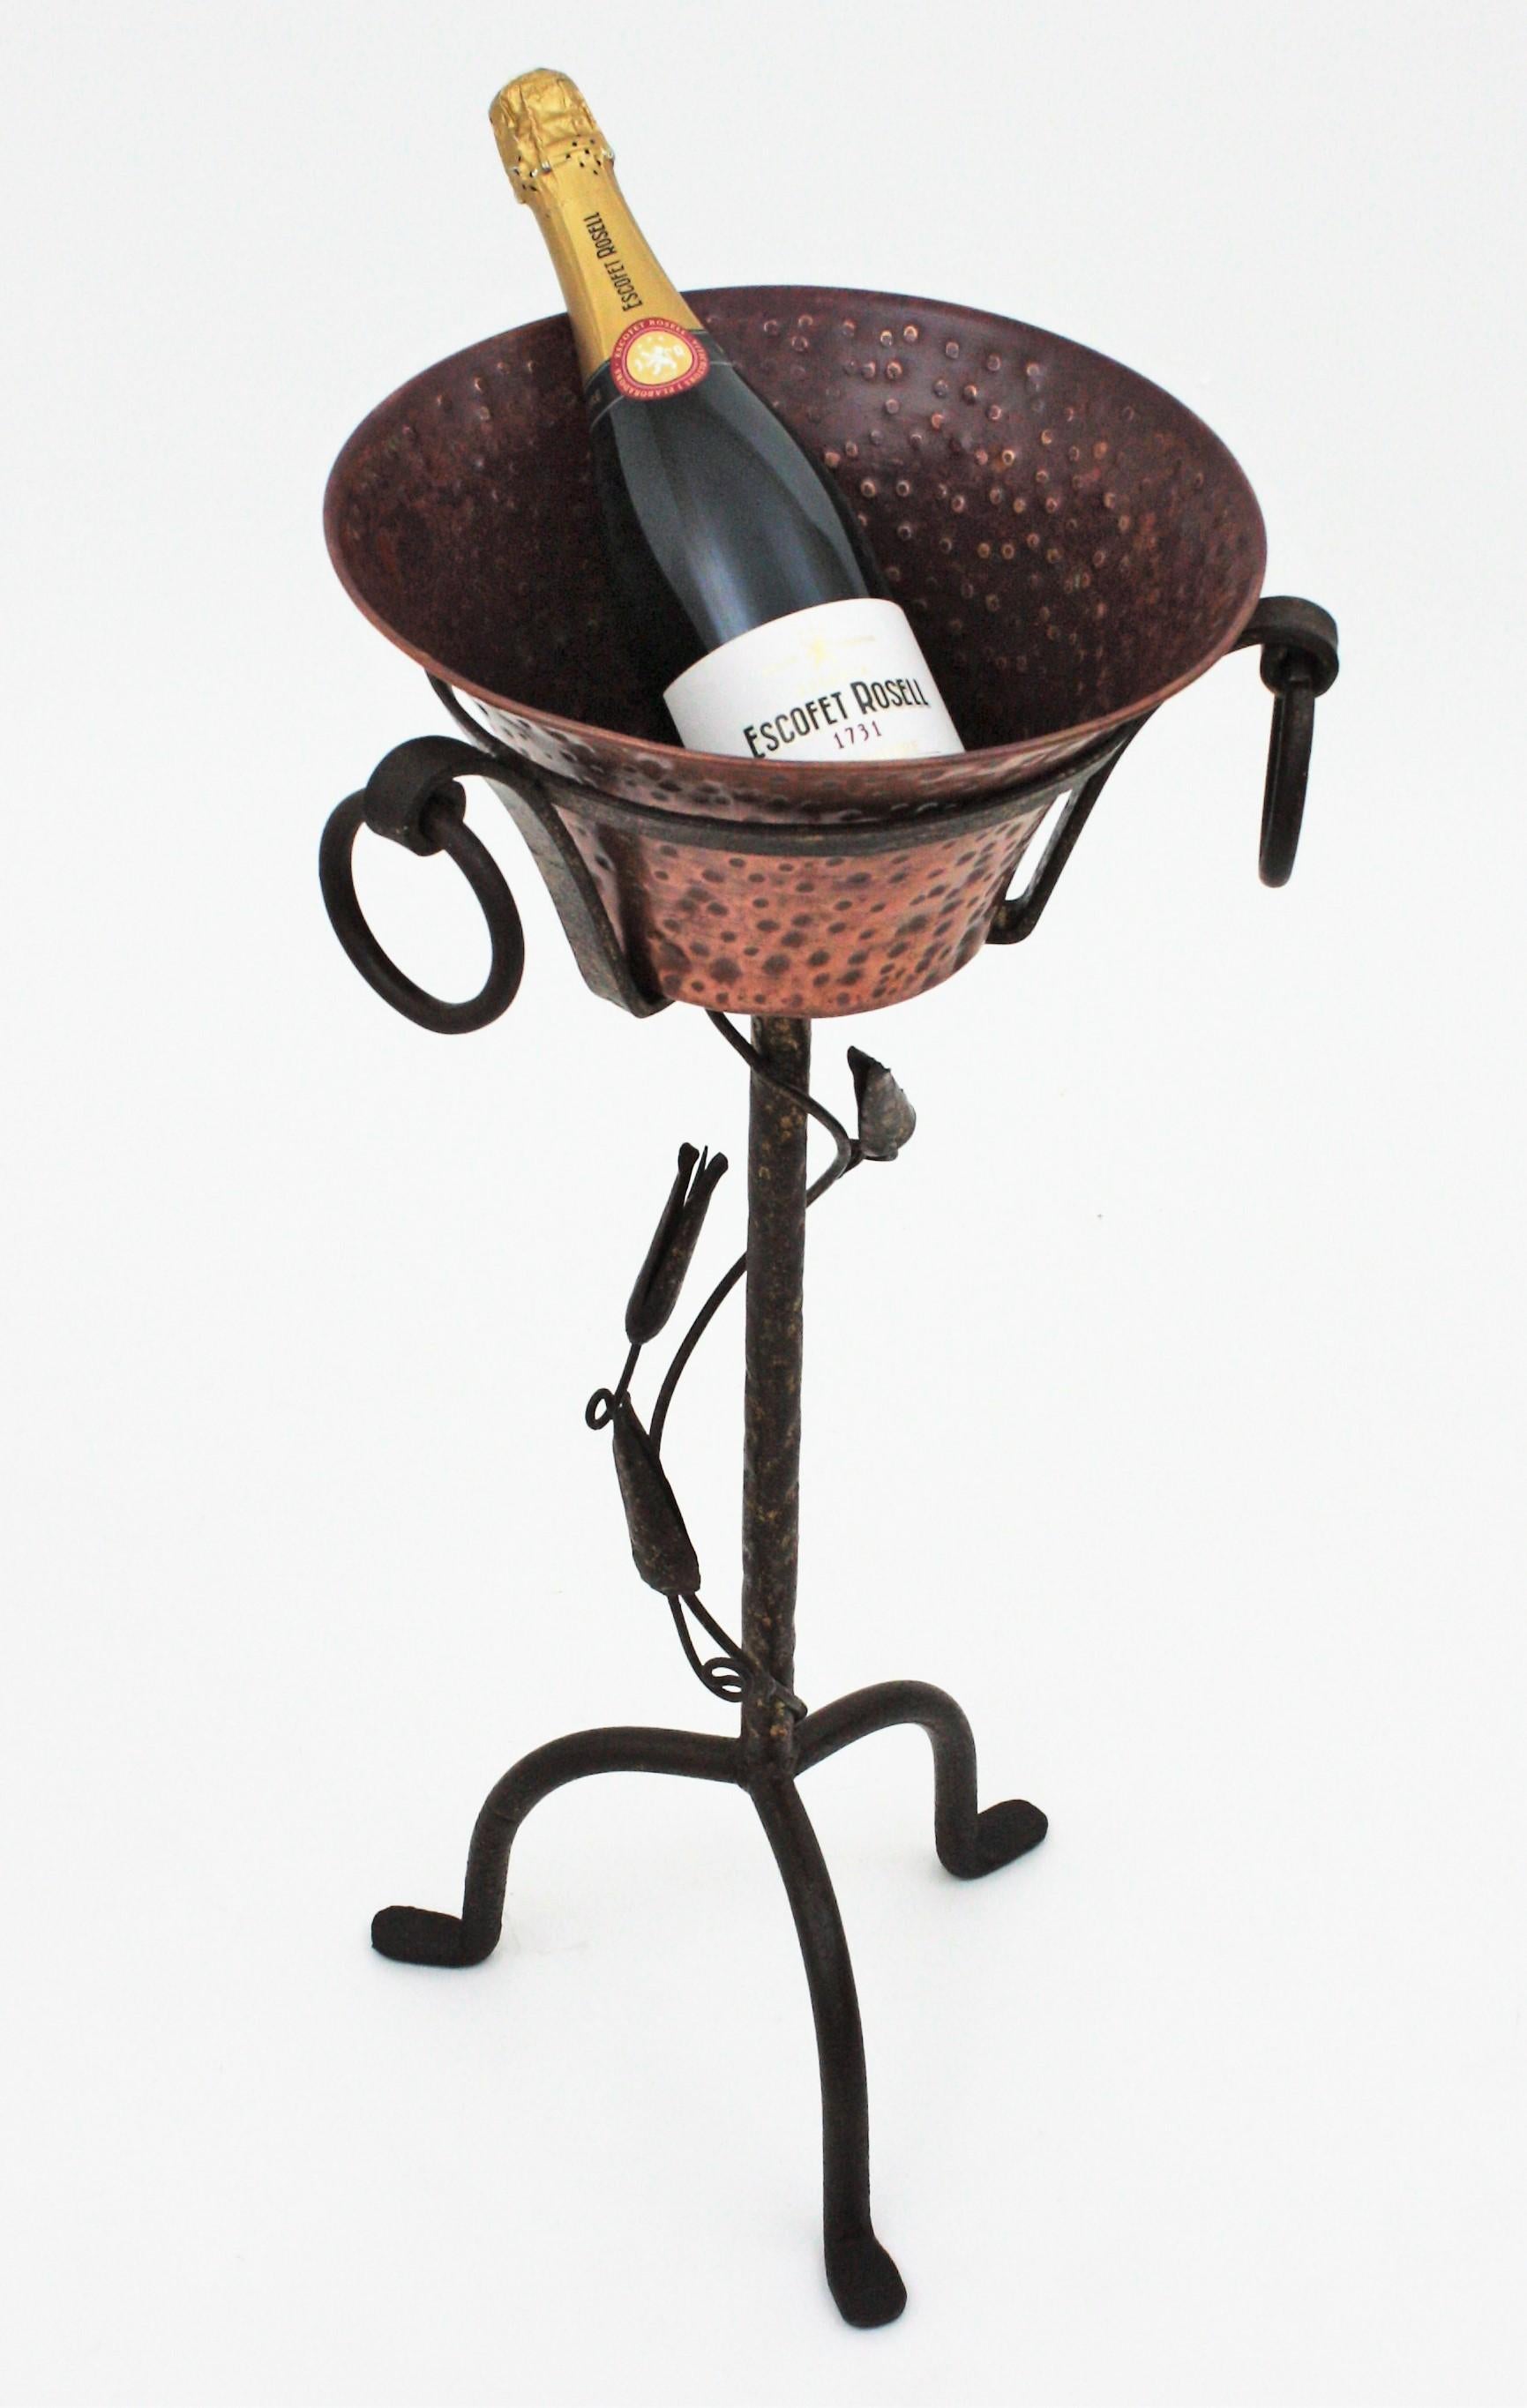 Parcel-gilt hand forged tripod stand with hand-hammered copper ice bucket, Spain, 1930s-1940
This pedestal champagne serving stand is all made by hand. The handwrought iron stand has a tripod base with floral decorative details surrounding the stem